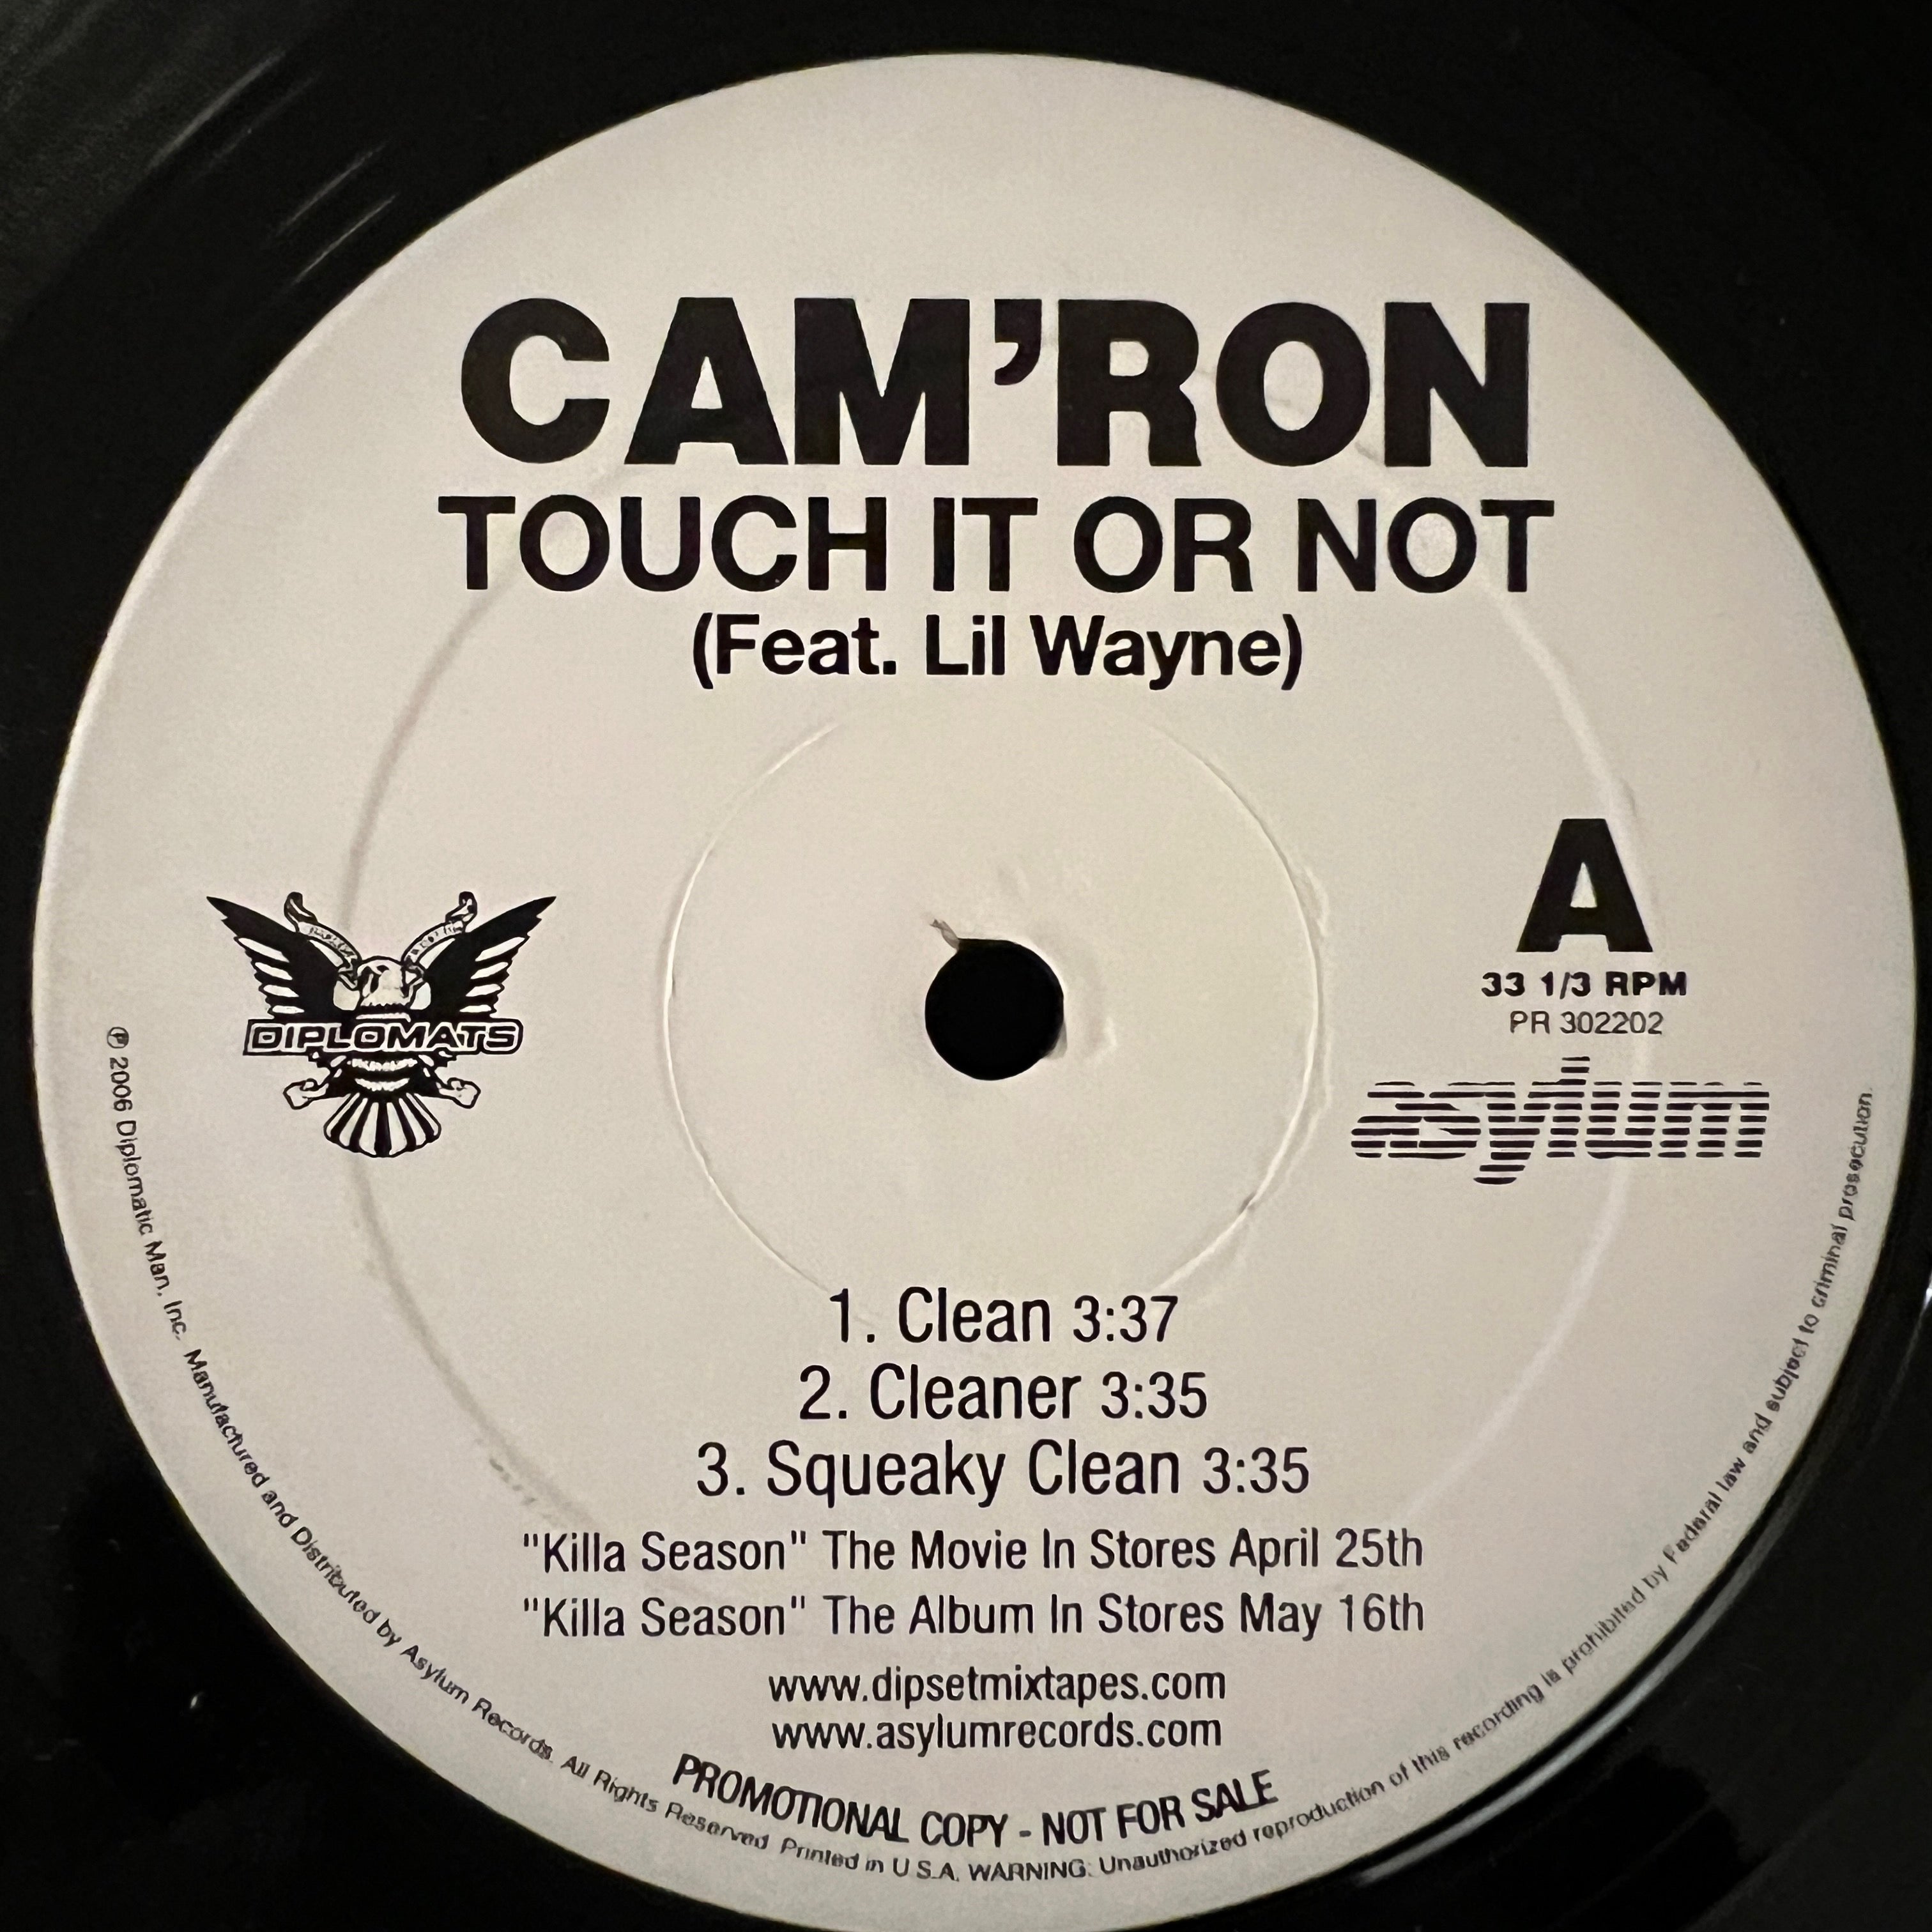 Cam'ron - Touch It Or Not feat Lil Wayne (12" Promo) VG+